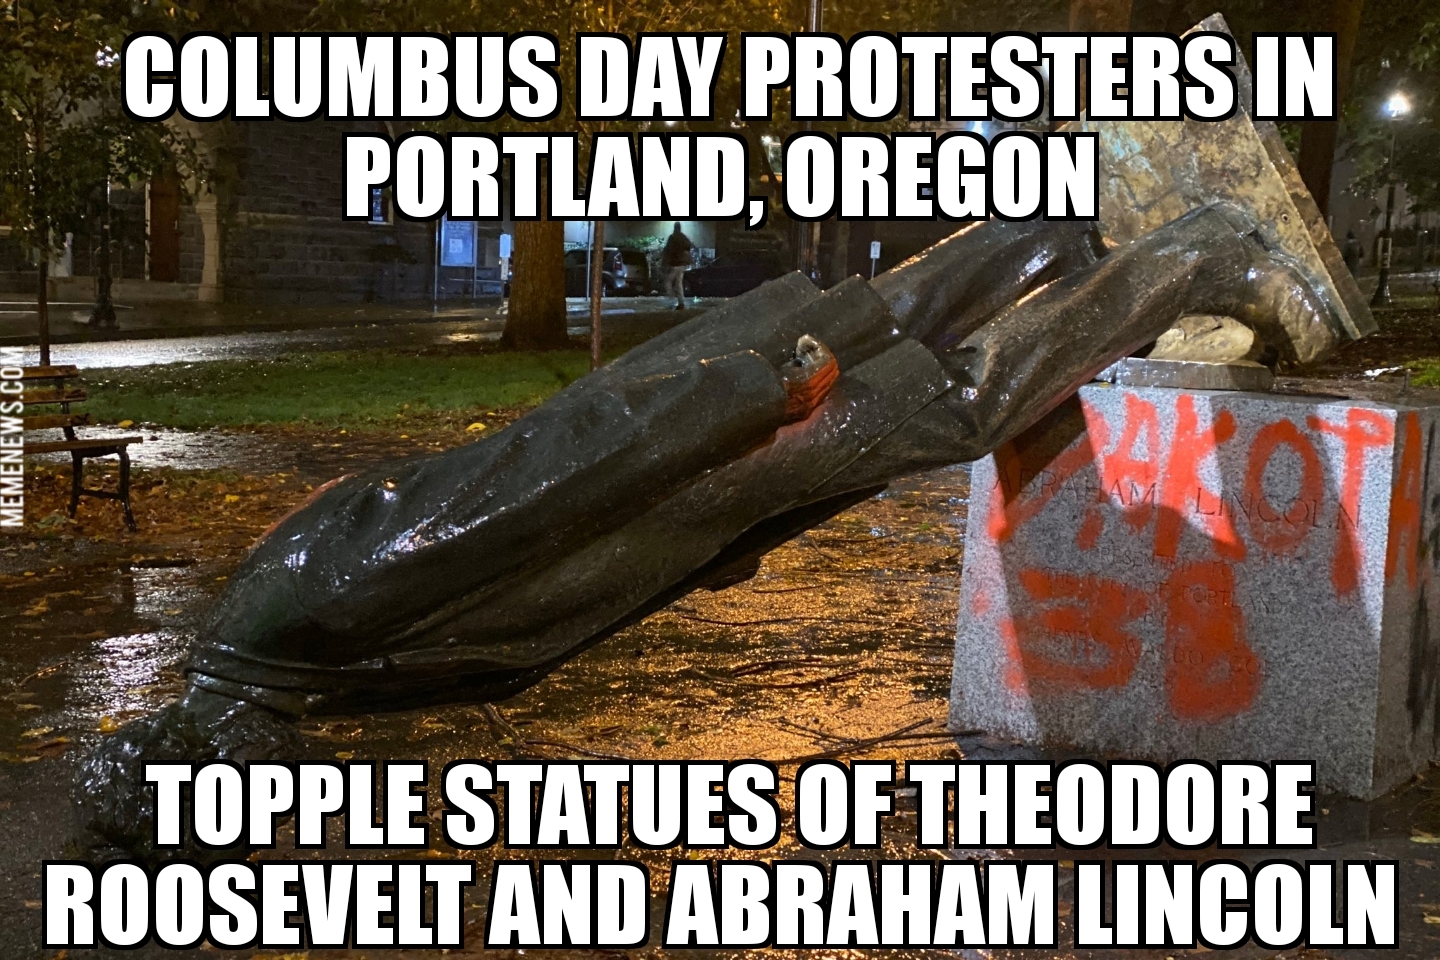 Portland protesters topple Lincoln, Roosevelt statues